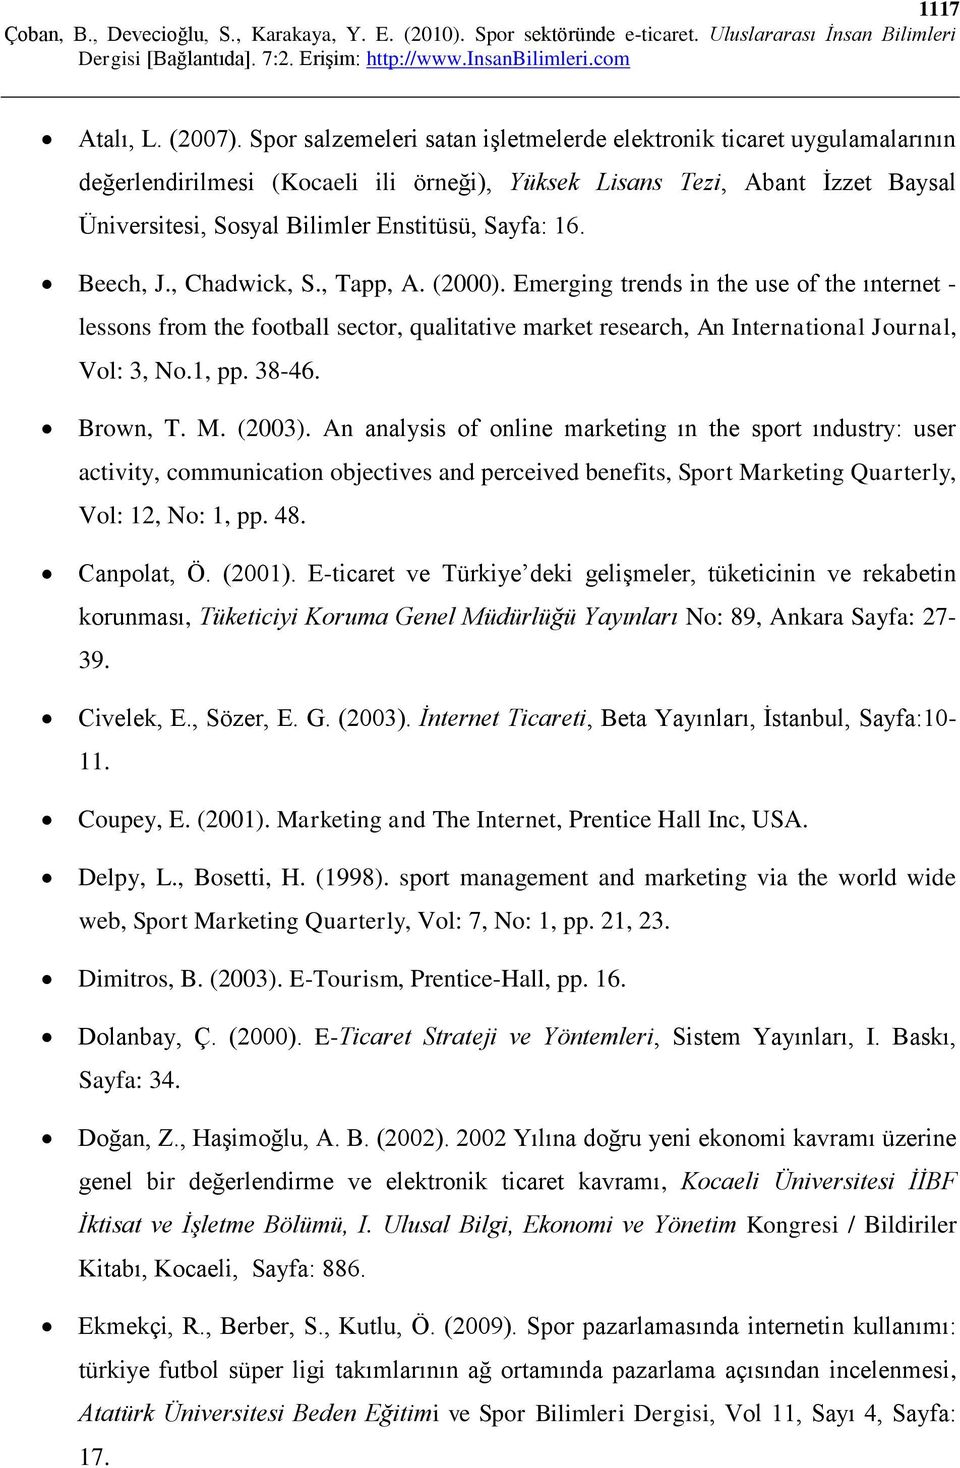 16. Beech, J., Chadwick, S., Tapp, A. (2000). Emerging trends in the use of the ınternet - lessons from the football sector, qualitative market research, An International Journal, Vol: 3, No.1, pp.